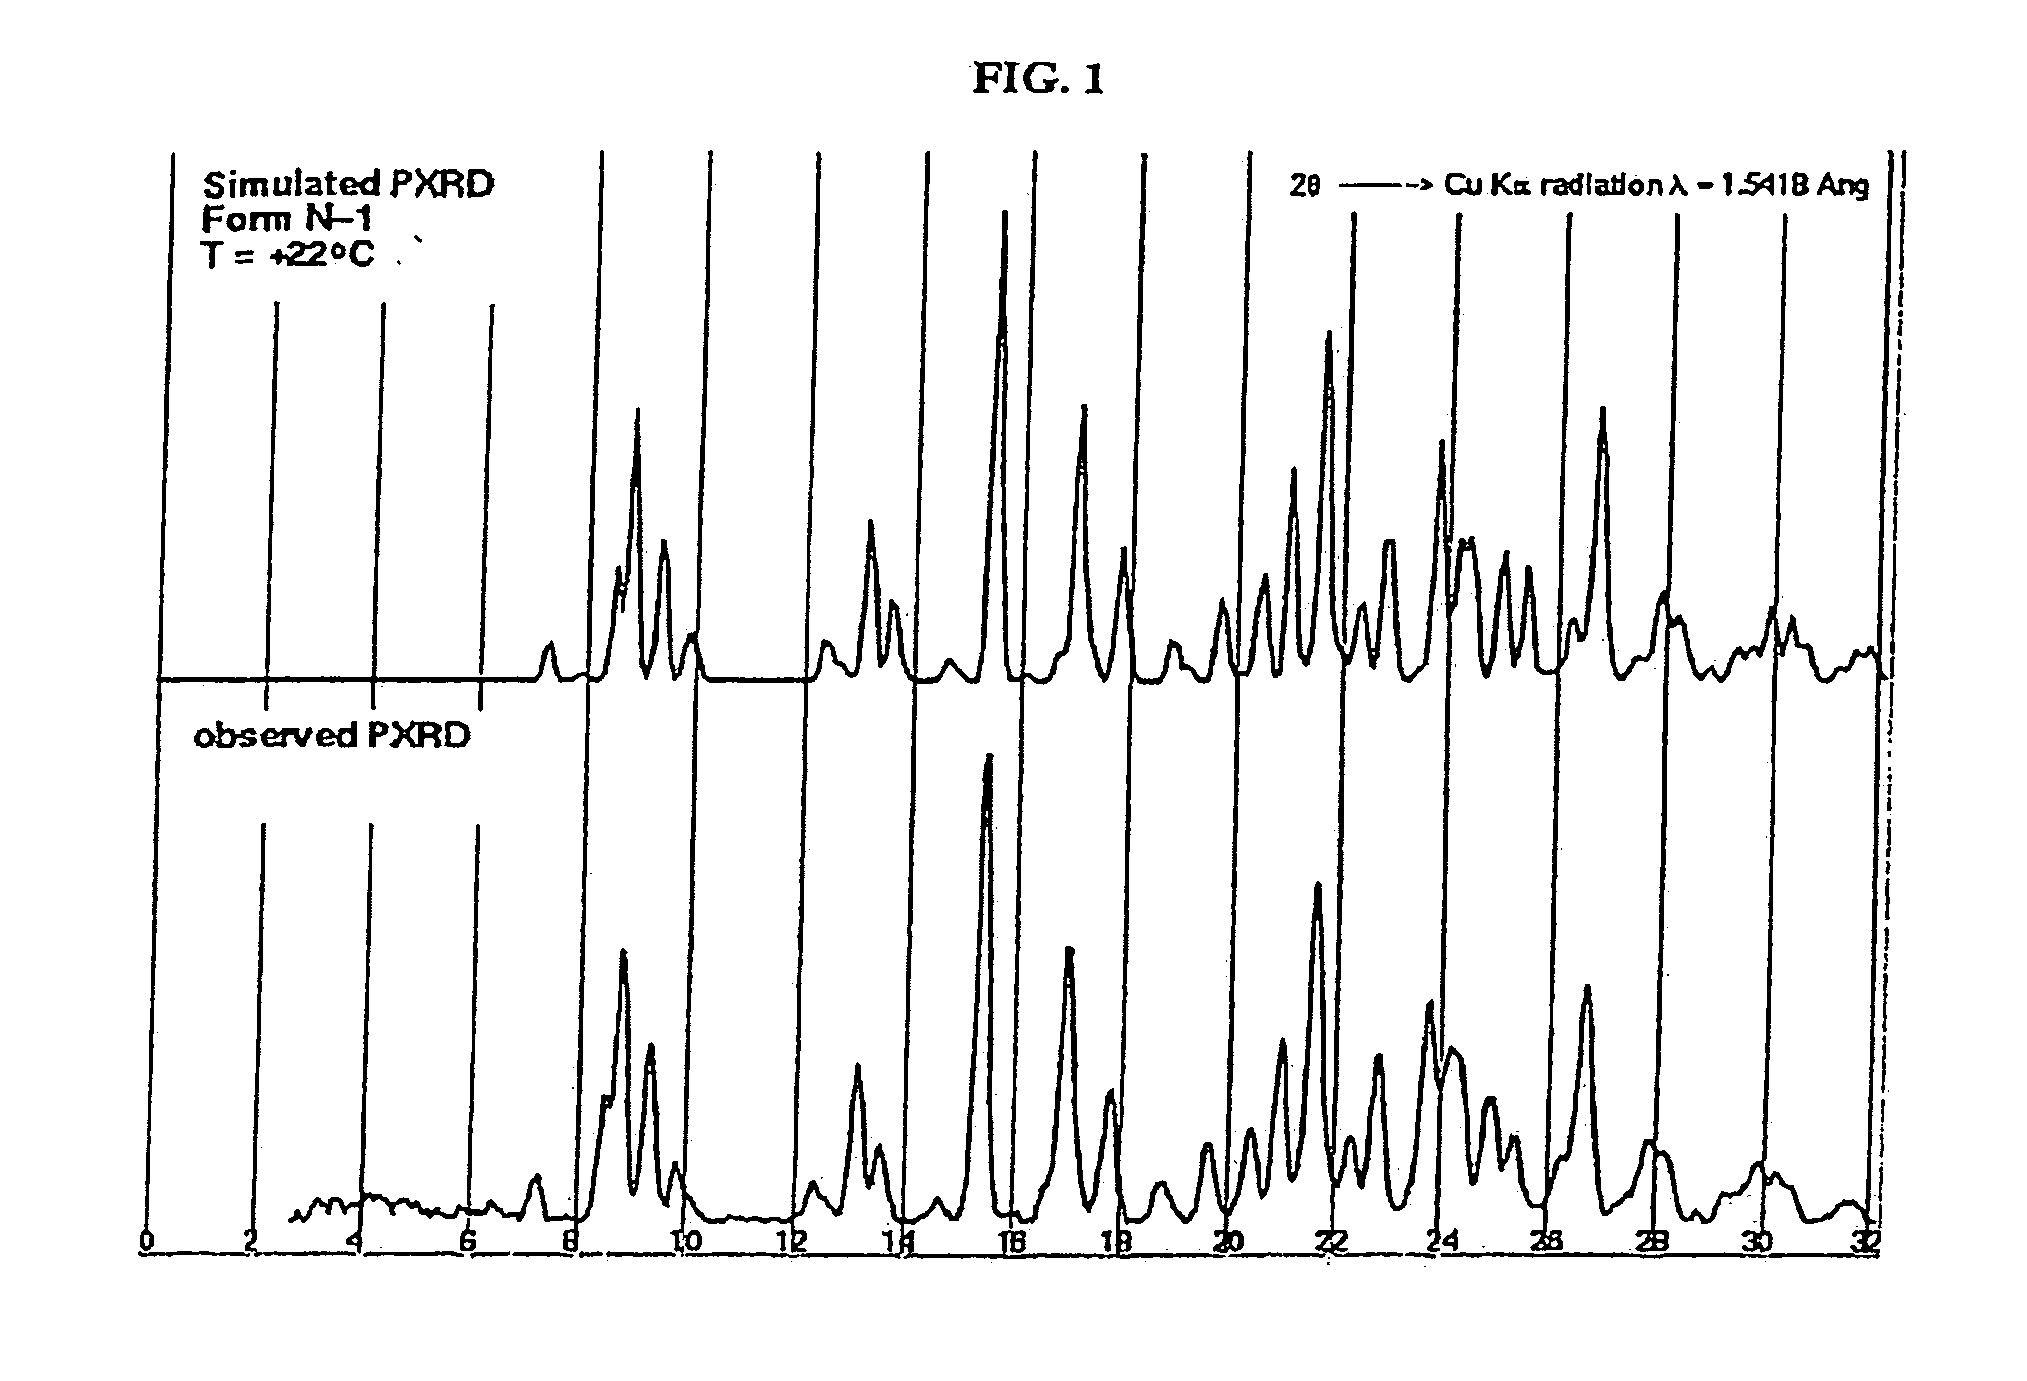 Crystalline forms and process for preparing spiro-hydantoin compounds